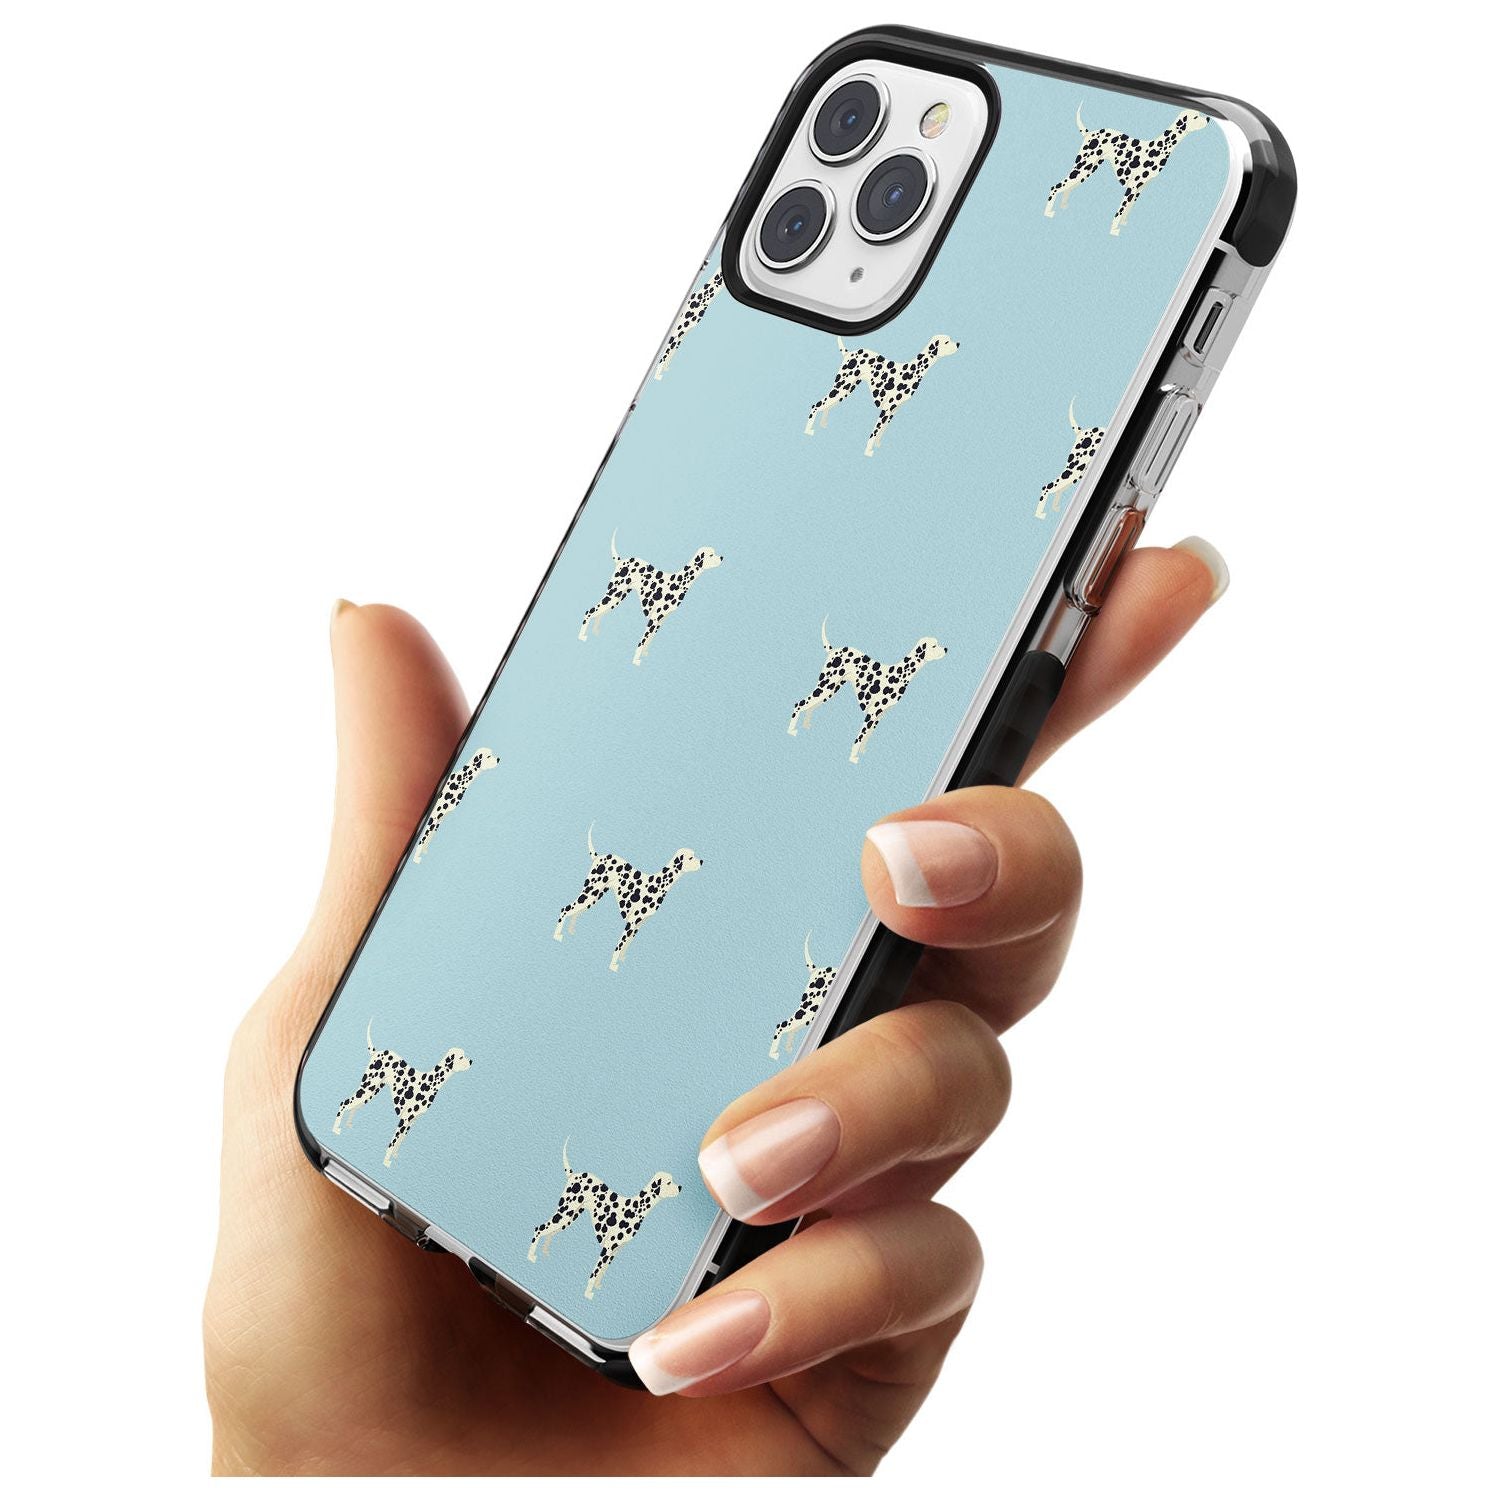 Dalmation Dog Pattern Black Impact Phone Case for iPhone 11 Pro Max